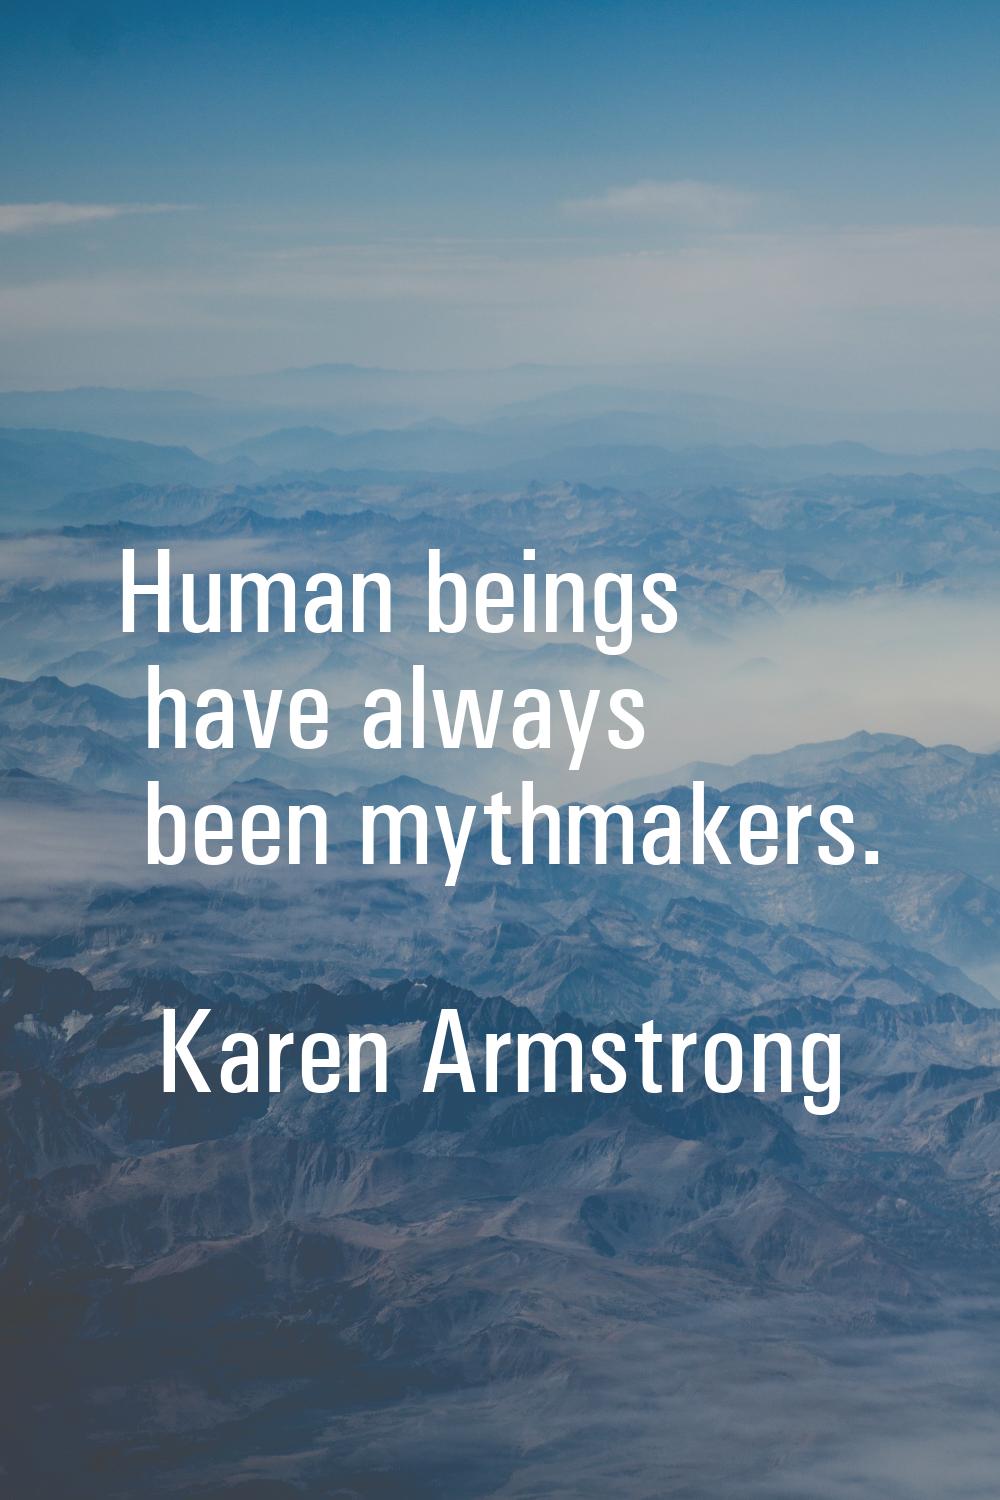 Human beings have always been mythmakers.